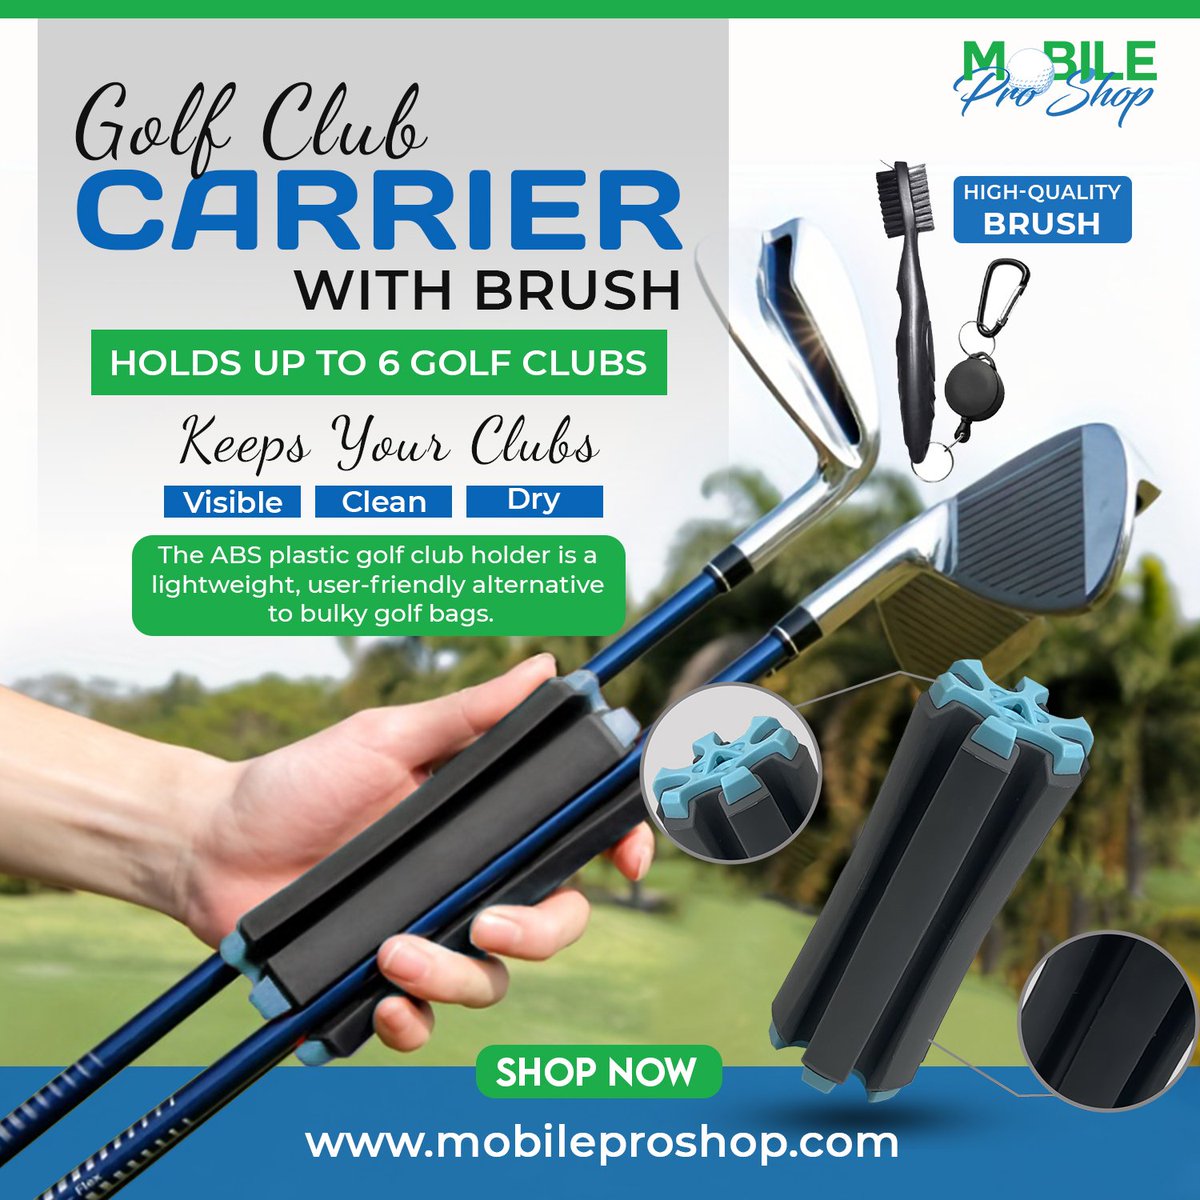 Golf Club Carrier with Brush - Holds up to 6 Golf Clubs, Keeps Your Clubs Visible, Clean & Dry – Premium Quality Golf Club Holder by Mobile Pro Shop!

#MobileProShop #GolfClubCarrier #GolfGear #GolfAccessories #PremiumQuality #ClubHolder #GolfClubs